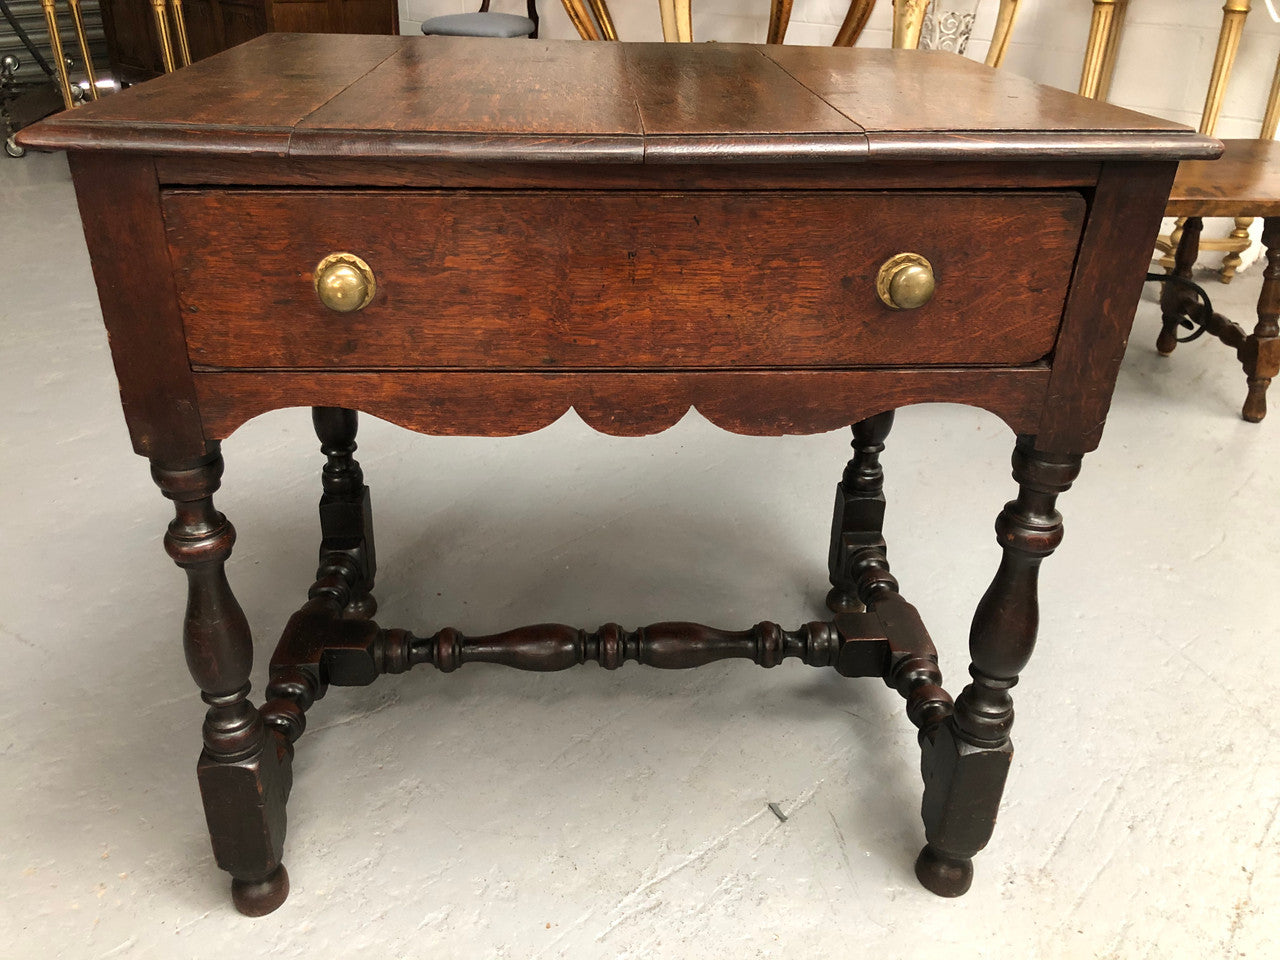 Antique French Oak side table with drawer, it has a beautiful "Mellow Patina". In good original detailed condition.